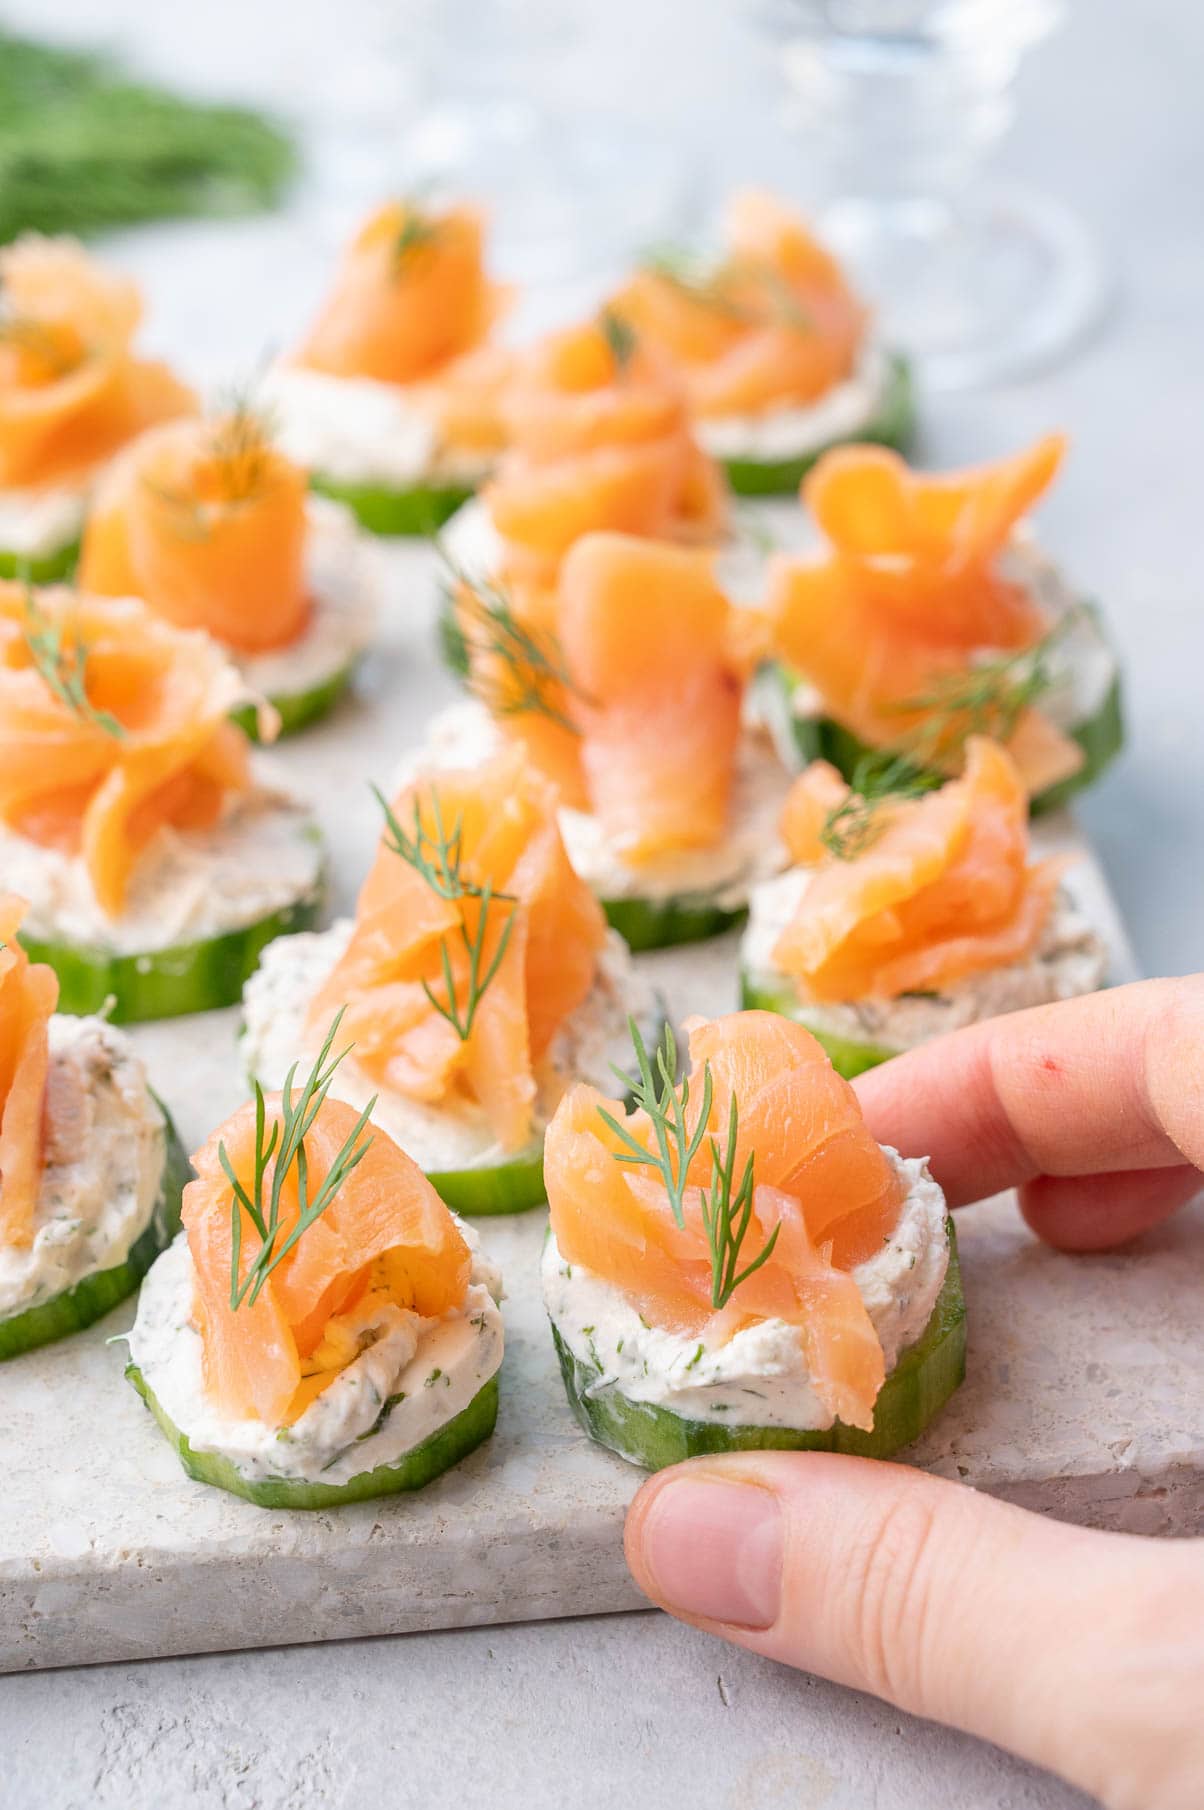 https://www.everyday-delicious.com/wp-content/uploads/2021/12/smoked-salmon-appetizer-everyday-delicious-1.jpg